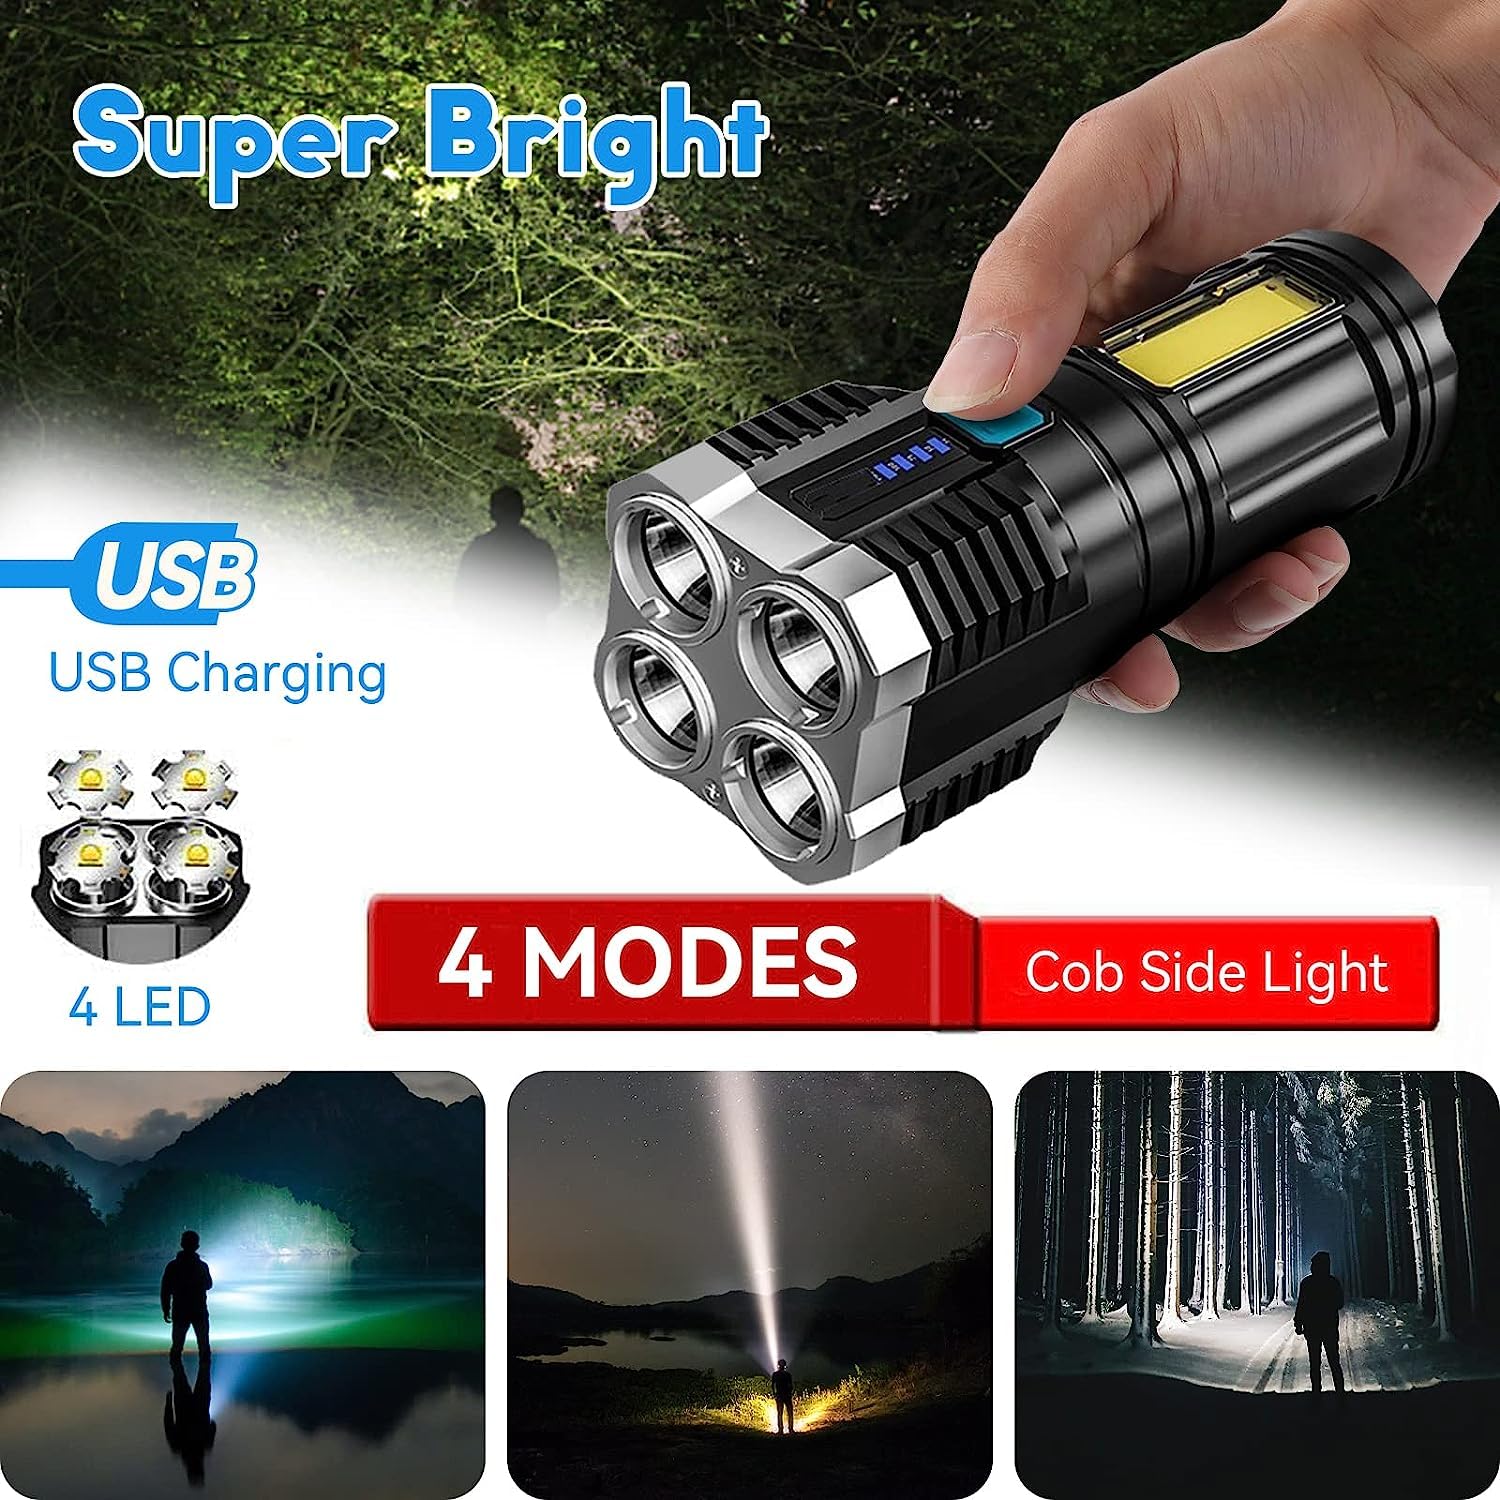 SkyShopy Rechargeable Flashlight,Super Bright LED Flashlight Waterproof Handheld Flashlight with 4 Modes for Camping Emergency Hiking (Black)